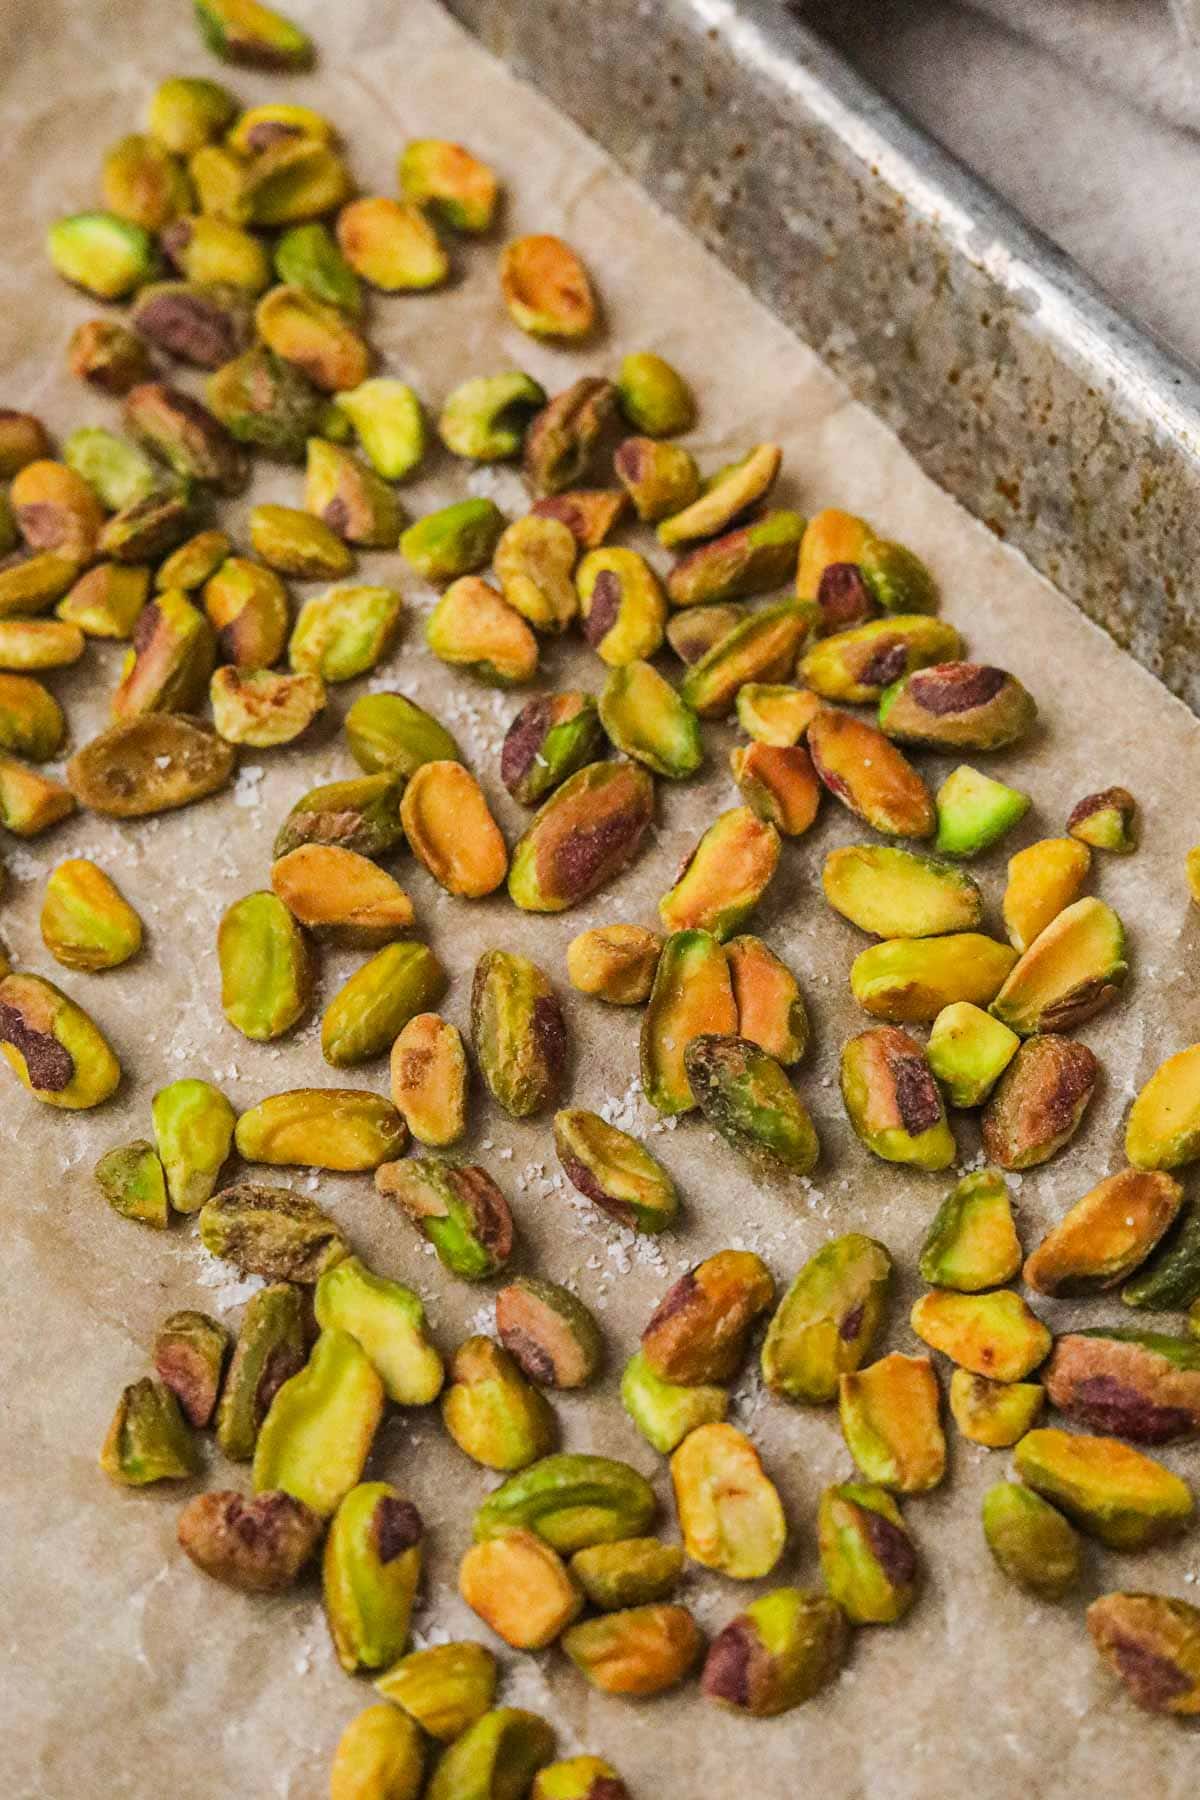 Roasted green pistachios with sea salt on a parchment paper-lined baking sheet.